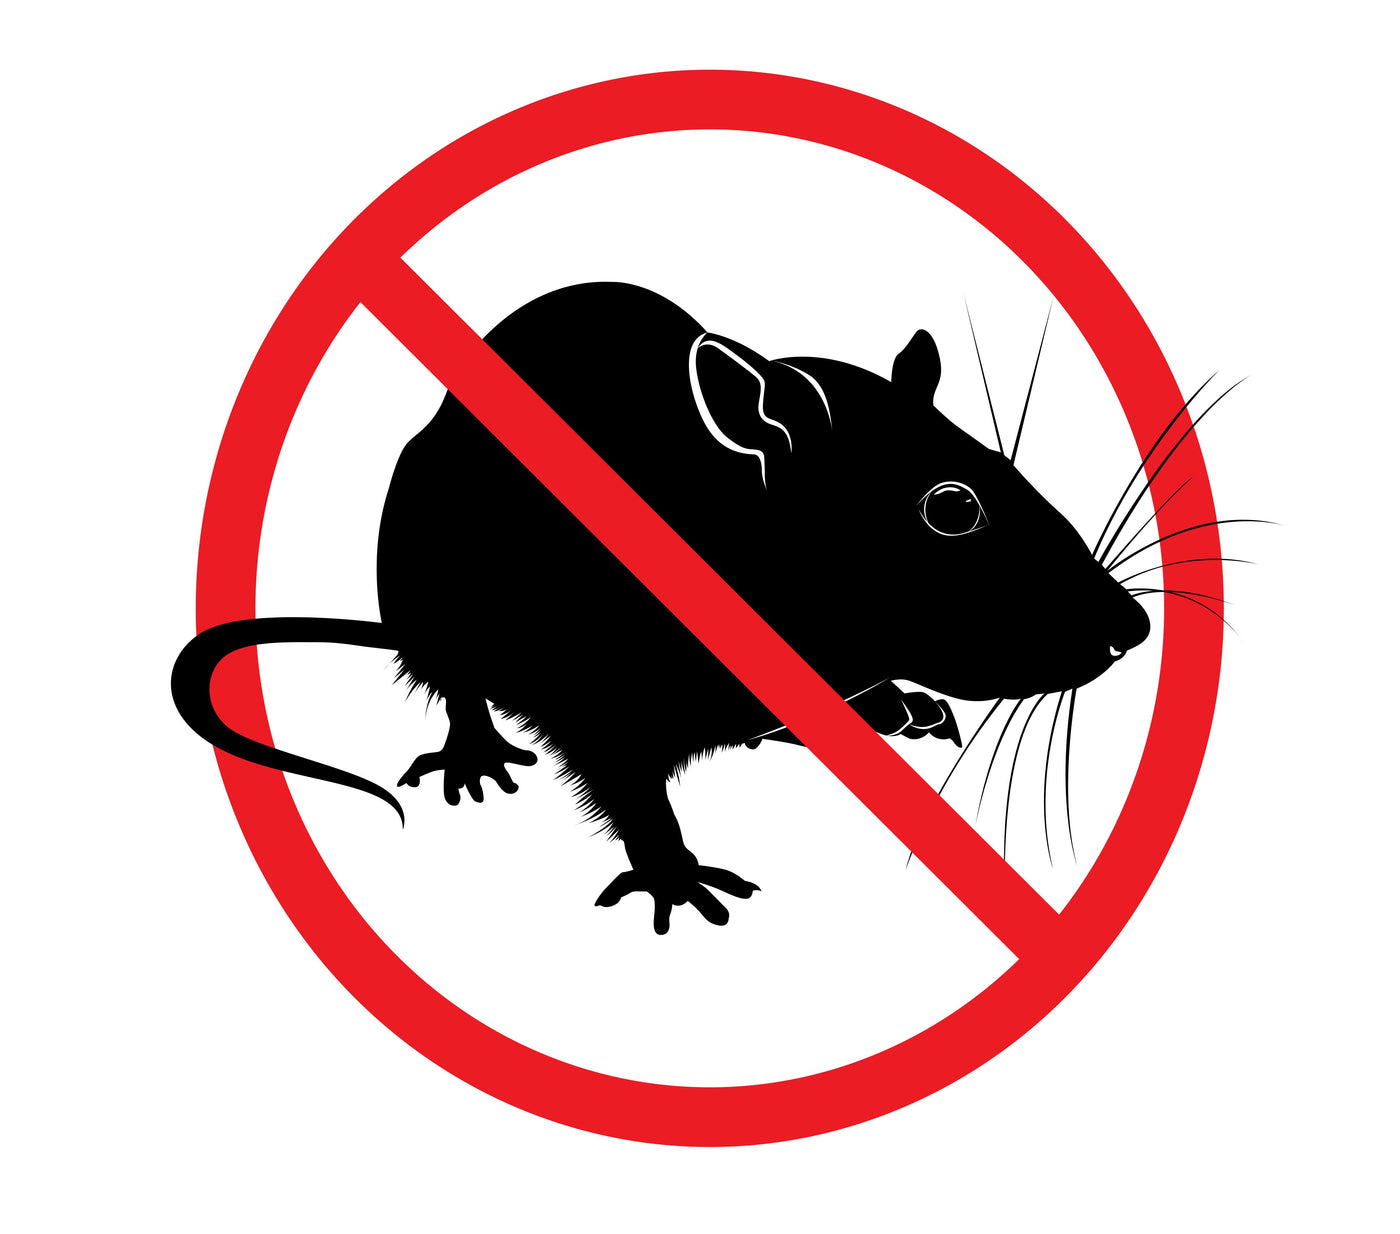 Upsells - Lifetime Rodent Protection & Device Replacement Plan